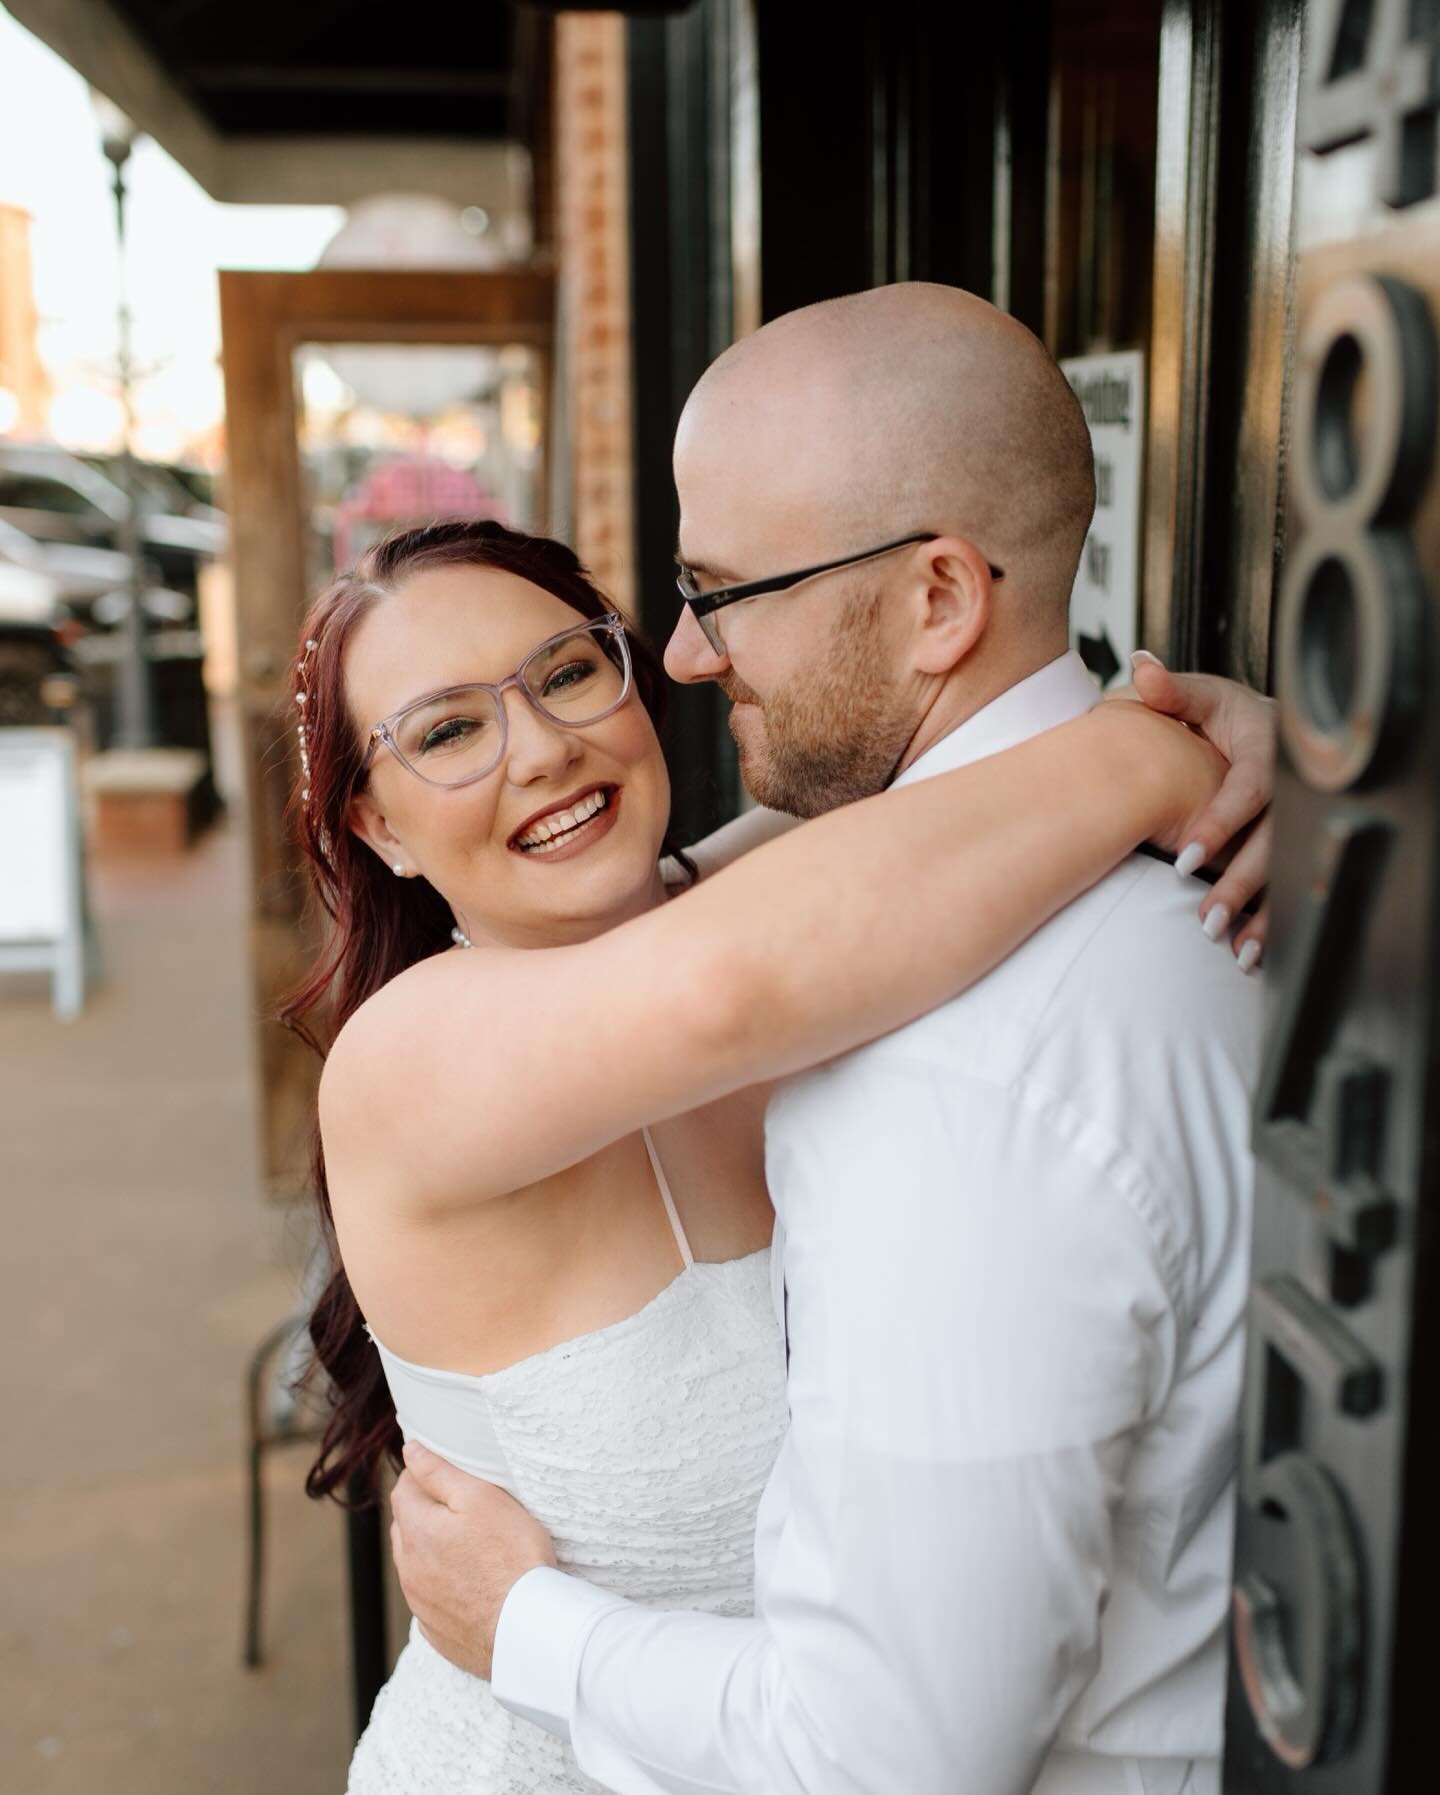 Late to posting, but it was worth the wait to show off Kaitlin + Jacob&rsquo;s rustic downtown wedding at @acworthconservatory. Spring weddings are in full force and I&rsquo;m grateful to have such amazing couples to work with! 

www.taylorsmithimage